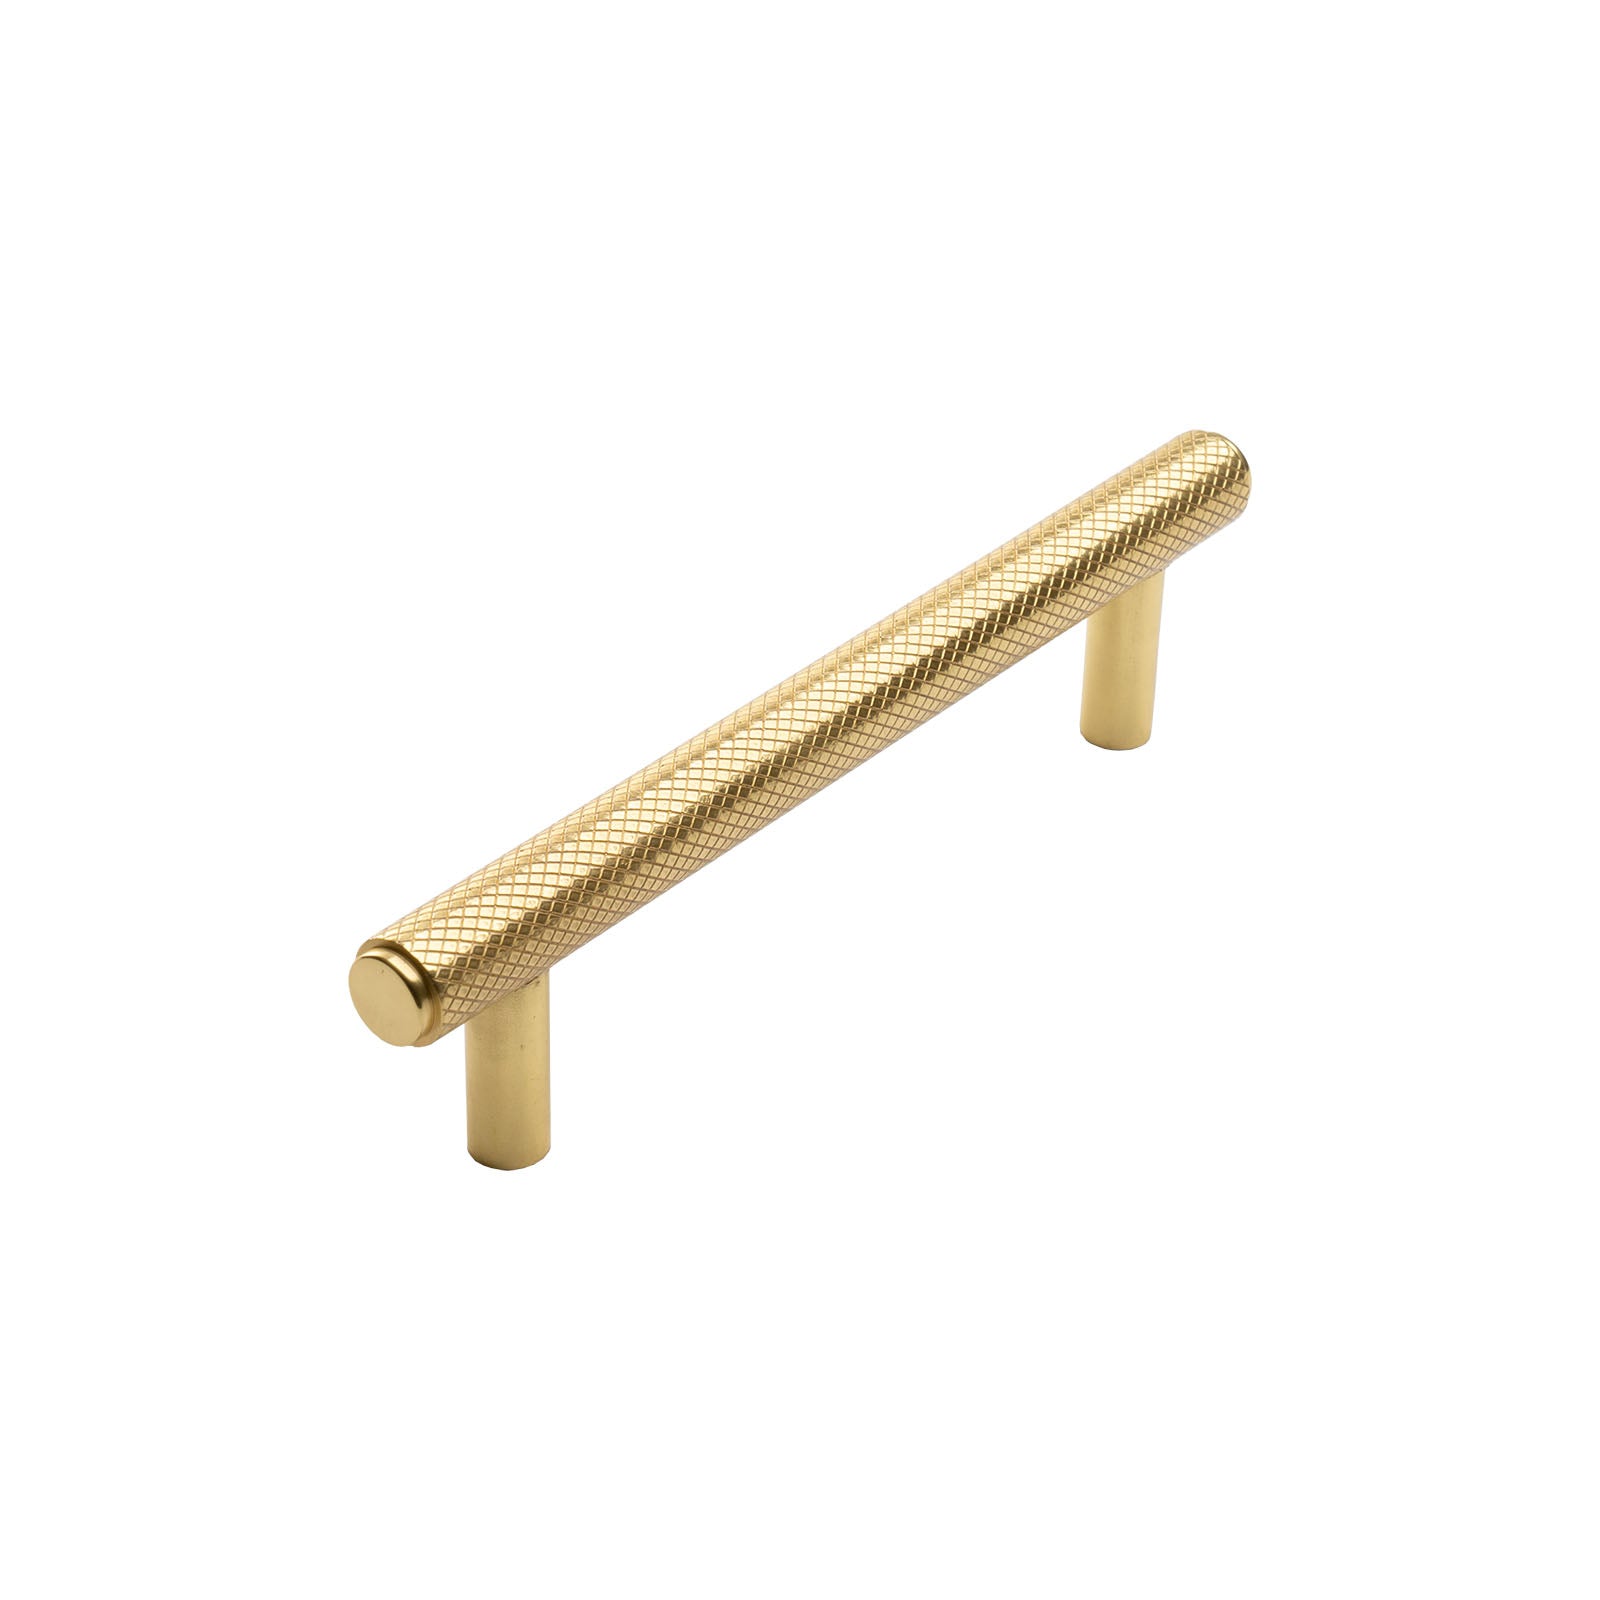 brass knurled pull handle SHOW